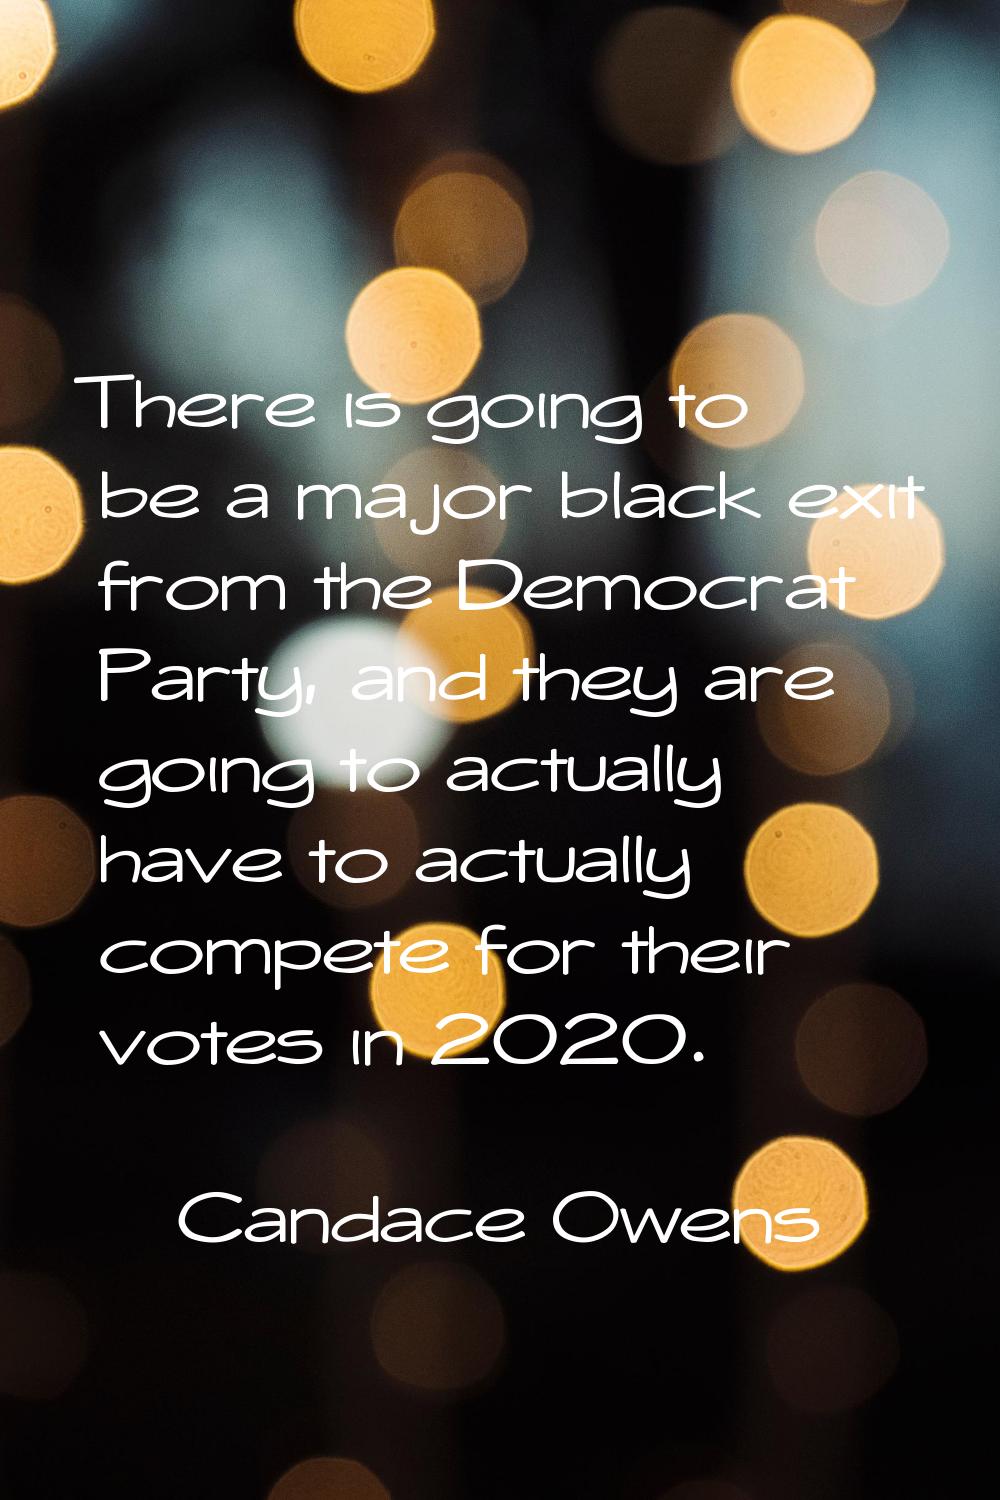 There is going to be a major black exit from the Democrat Party, and they are going to actually hav